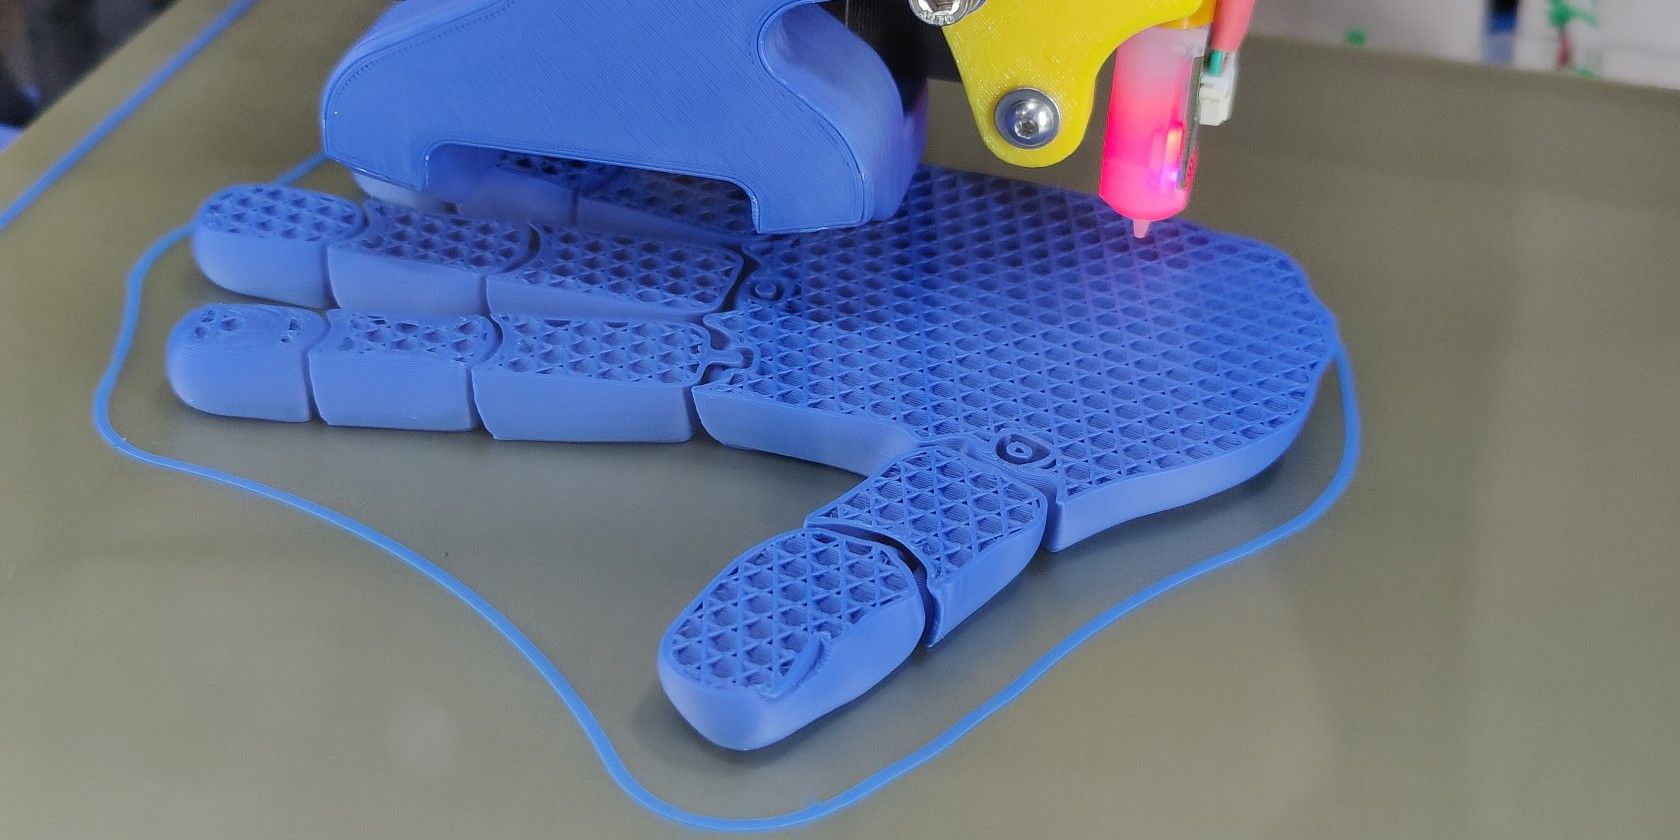 3D Print Failures: Common Causes and Solutions